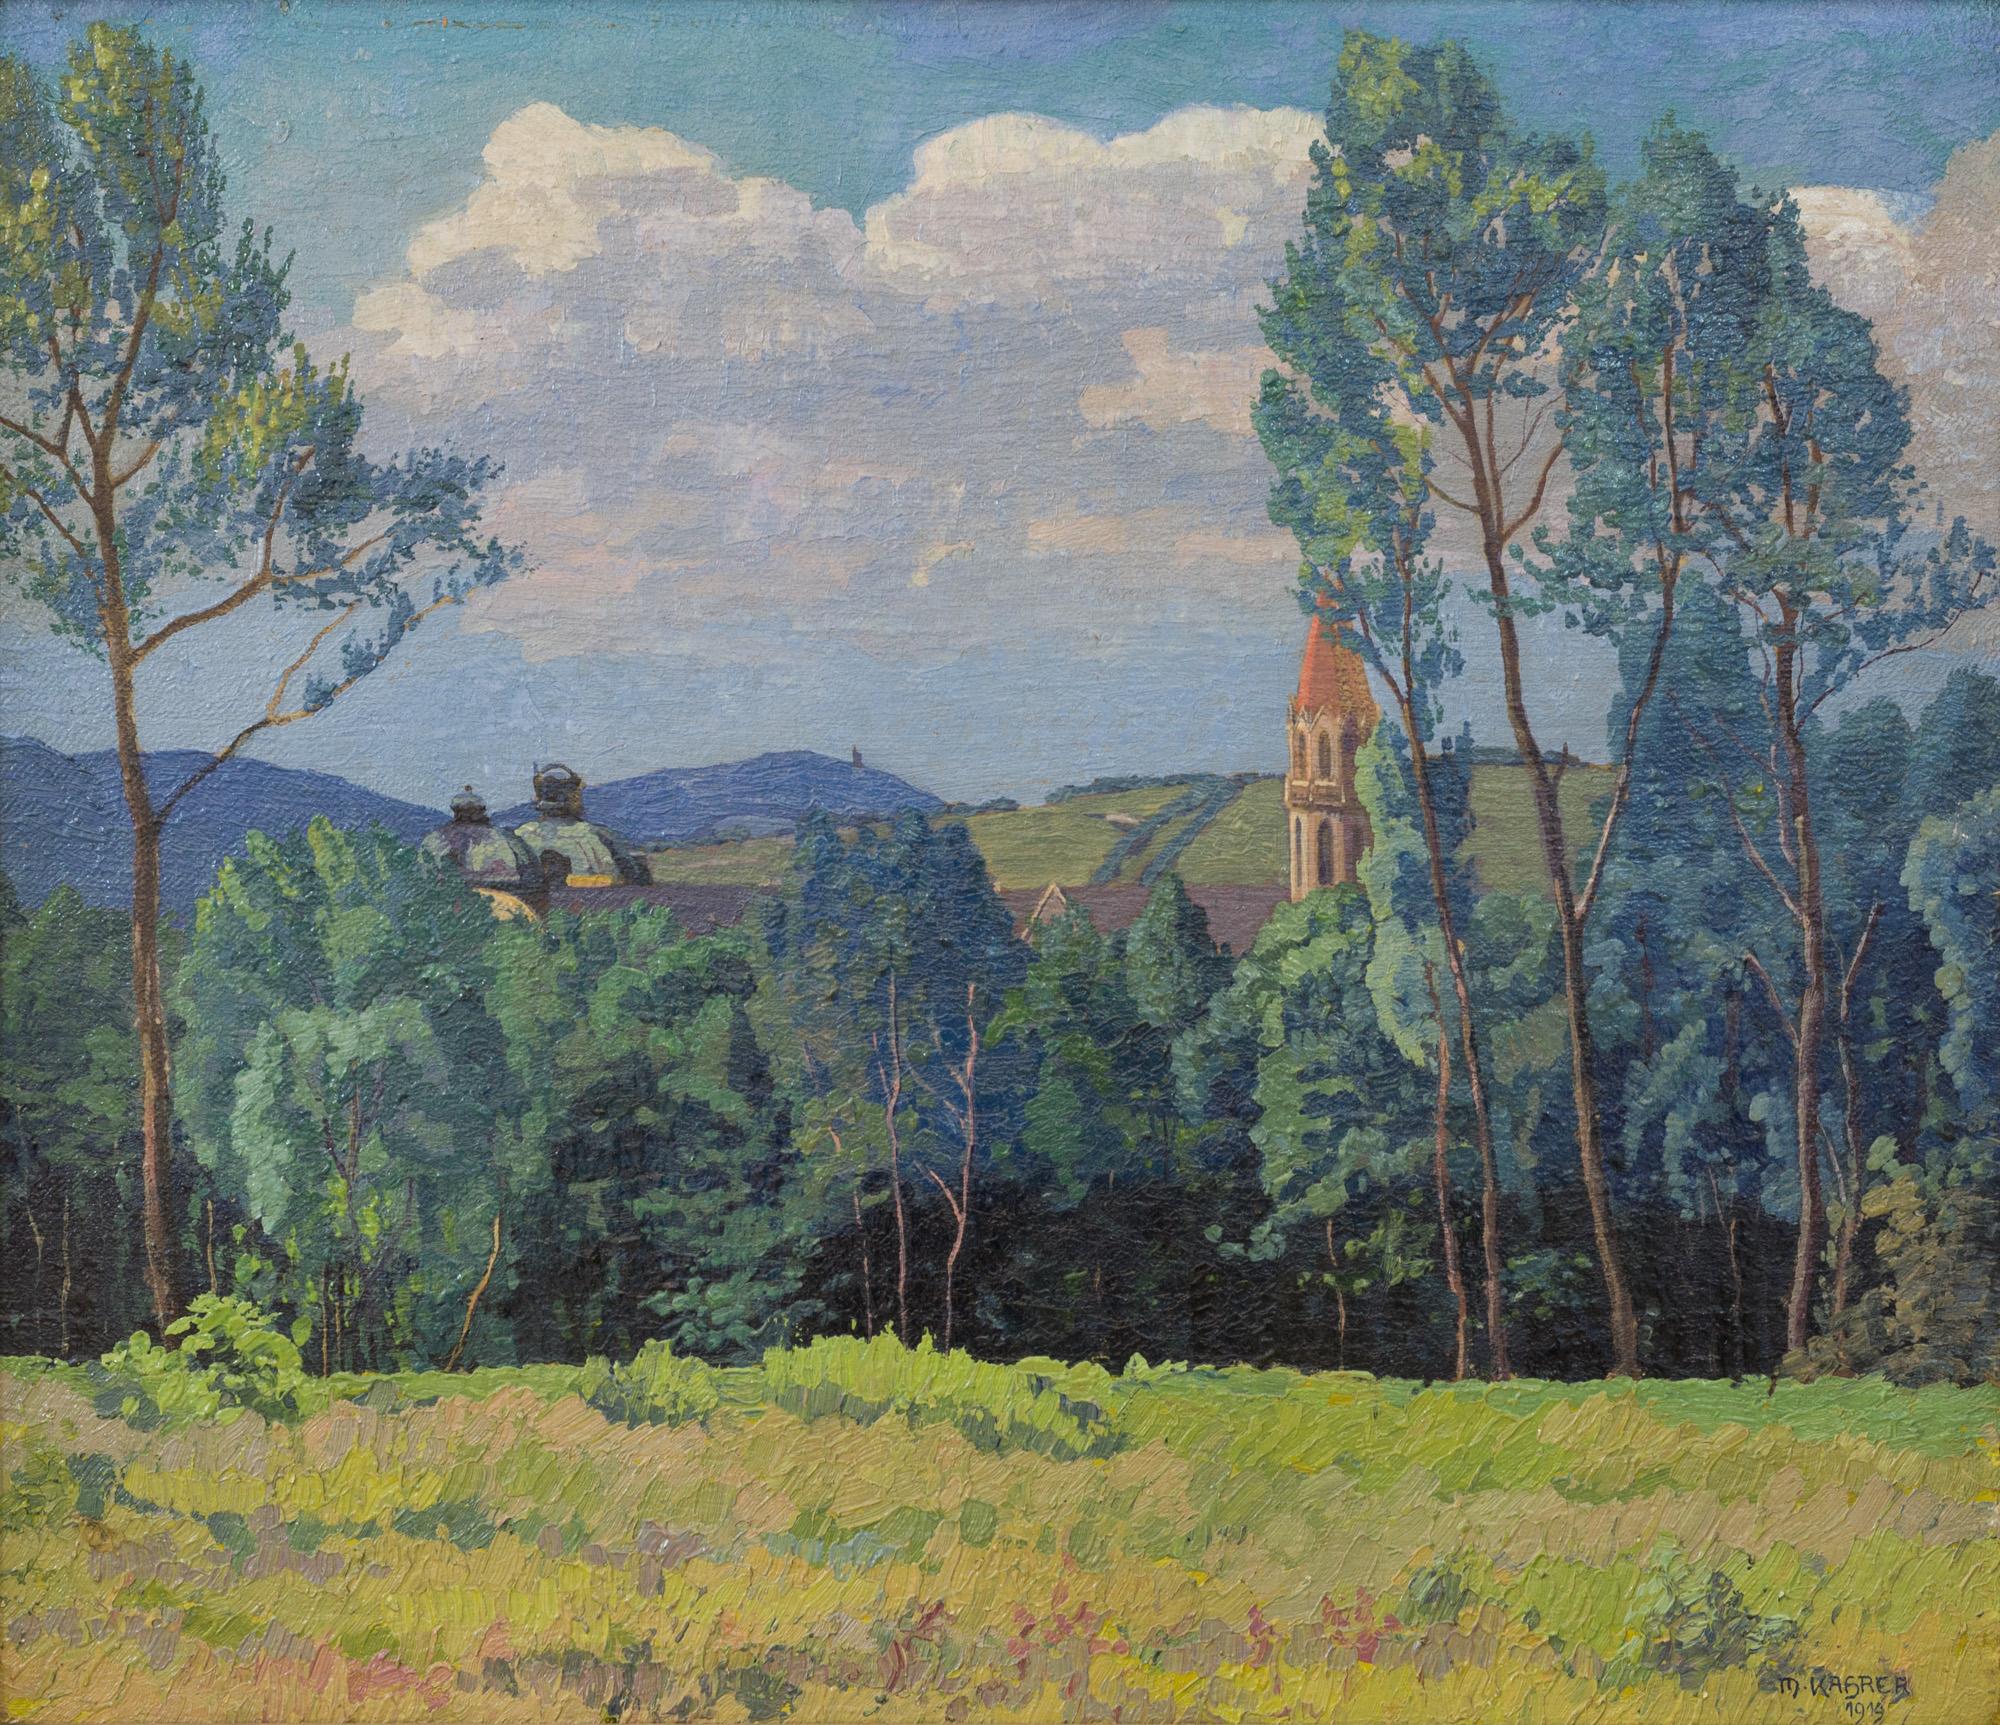 Artwork Sitft Klosterneuburg painted by Max Kahrer 1919 Classical Modernism oil on canvas signed

Max Kahrer studied at the Vienna Akademy of fina arts under Runpler and Griepenkerl. In 1903 he was already active in the Hagenabund and became a